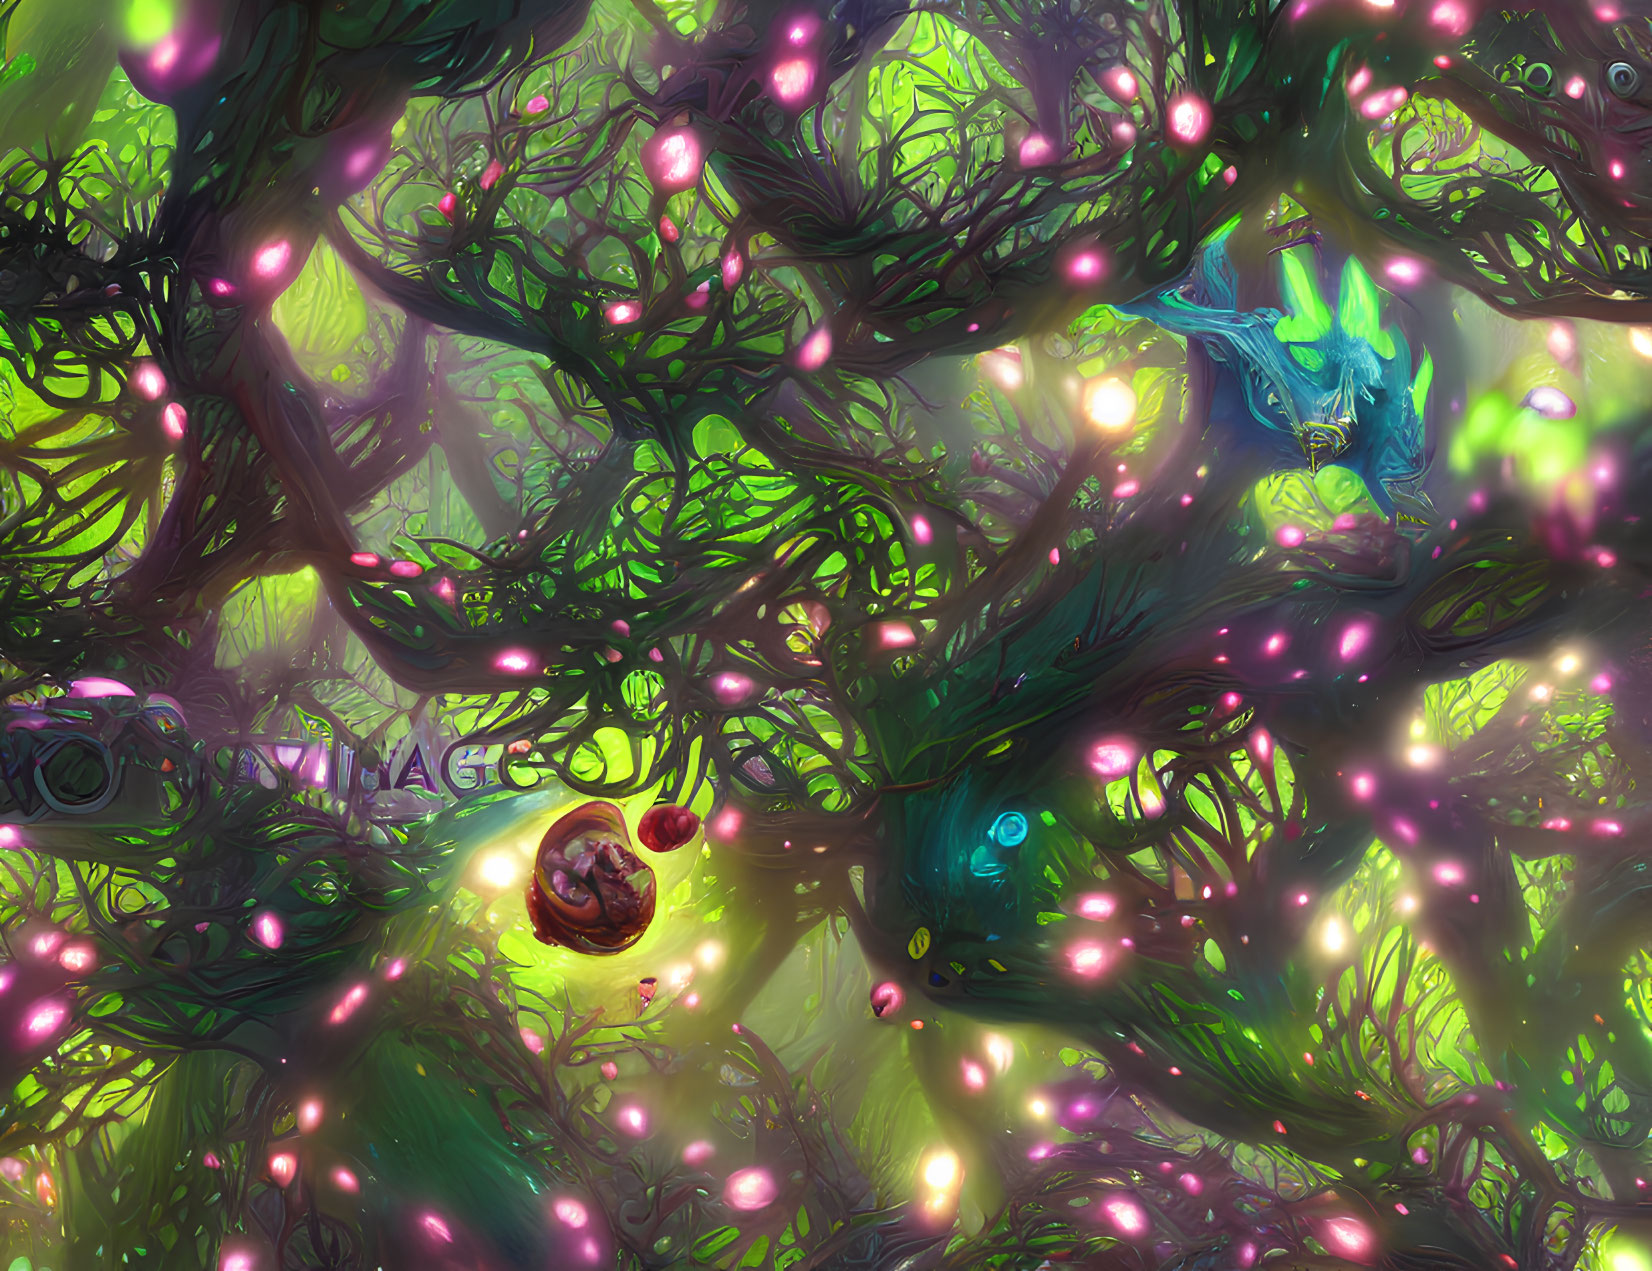 Enchanting forest scene with pink orbs, green trees, and blue creatures